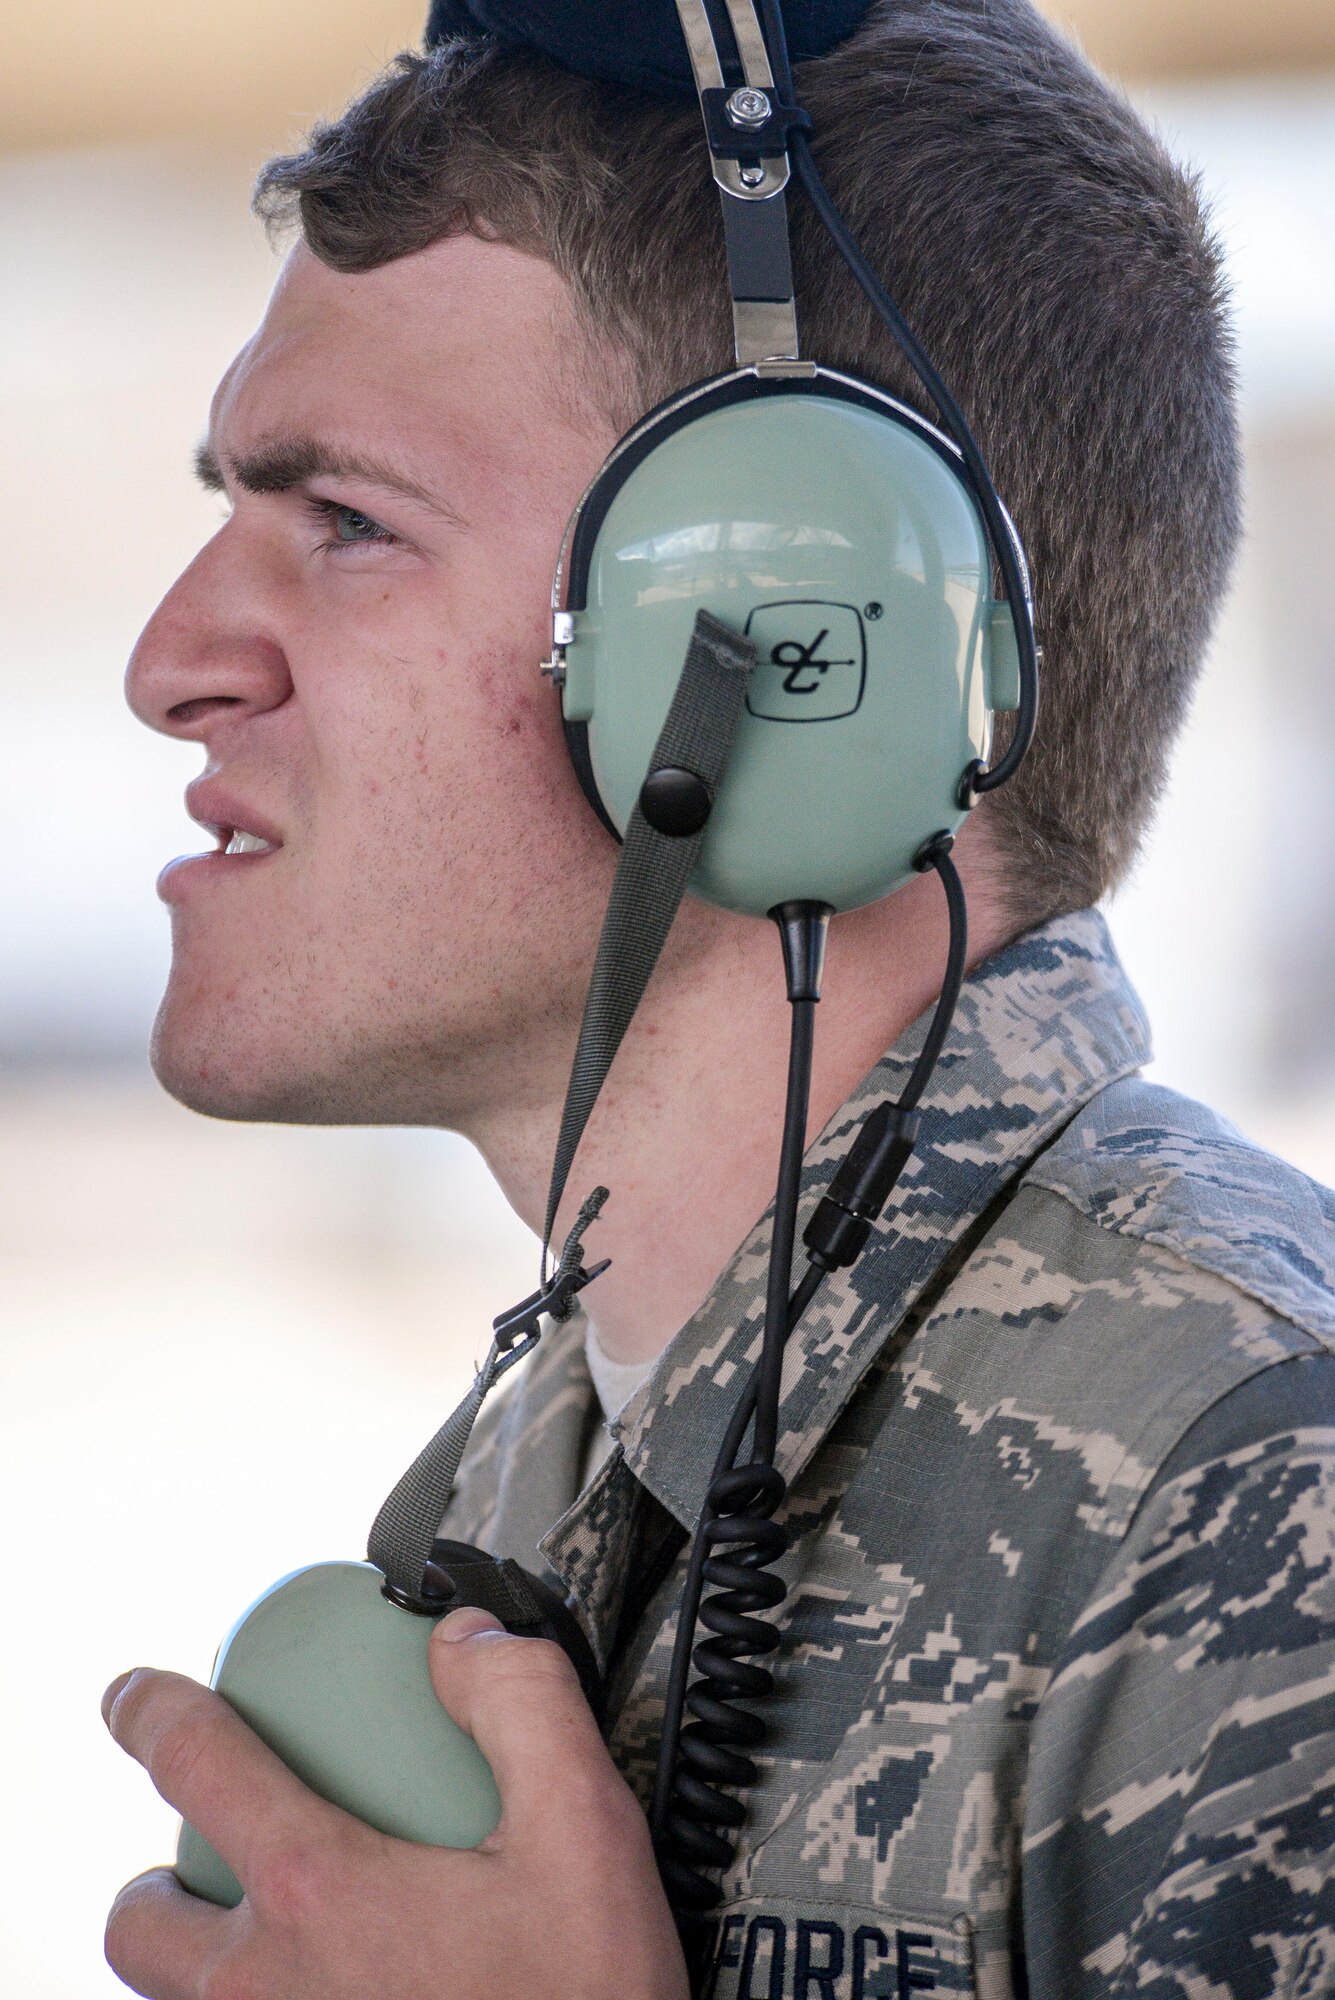 Airman 1st Class Michael Wilkins, a crew chief assigned to the 34th Aircraft Maintenance Unit, prepares to launch an F-35 Lightning II aircraft, number 5079, at Hill Air Force Base, Utah, May 22. In addition to the sortie being the 3,000th in an operational F-35 at Hill, it also turned out to be Wilkens’s first solo launch. (U.S. Air Force/Paul Holcomb)